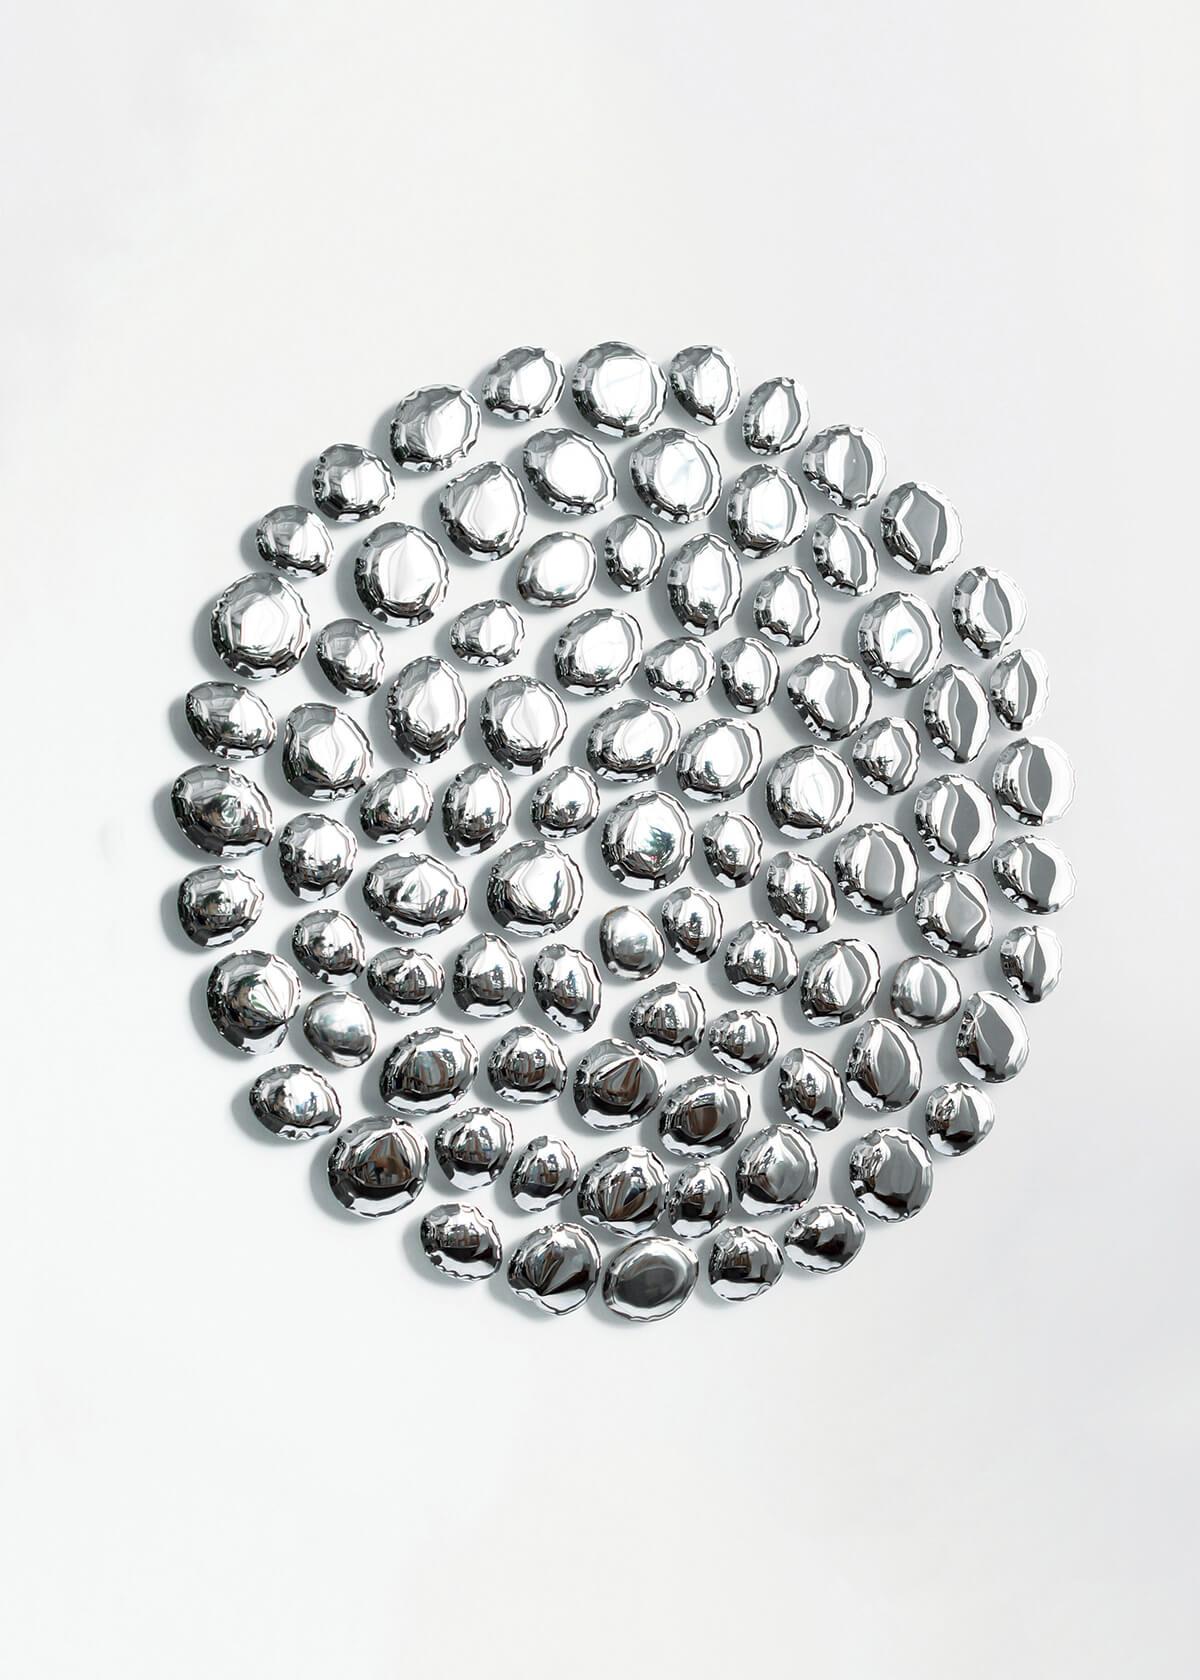 Wall Mounted Sculpture 'Mercury' by Zieta
Stainless Steel

Diameter 150 cm x Depth 7 cm

MERCURY is a reflecting installation of 89 air-inflated, bulging, stone-like structures forming a disorderly circle. The constellation of irregular silver